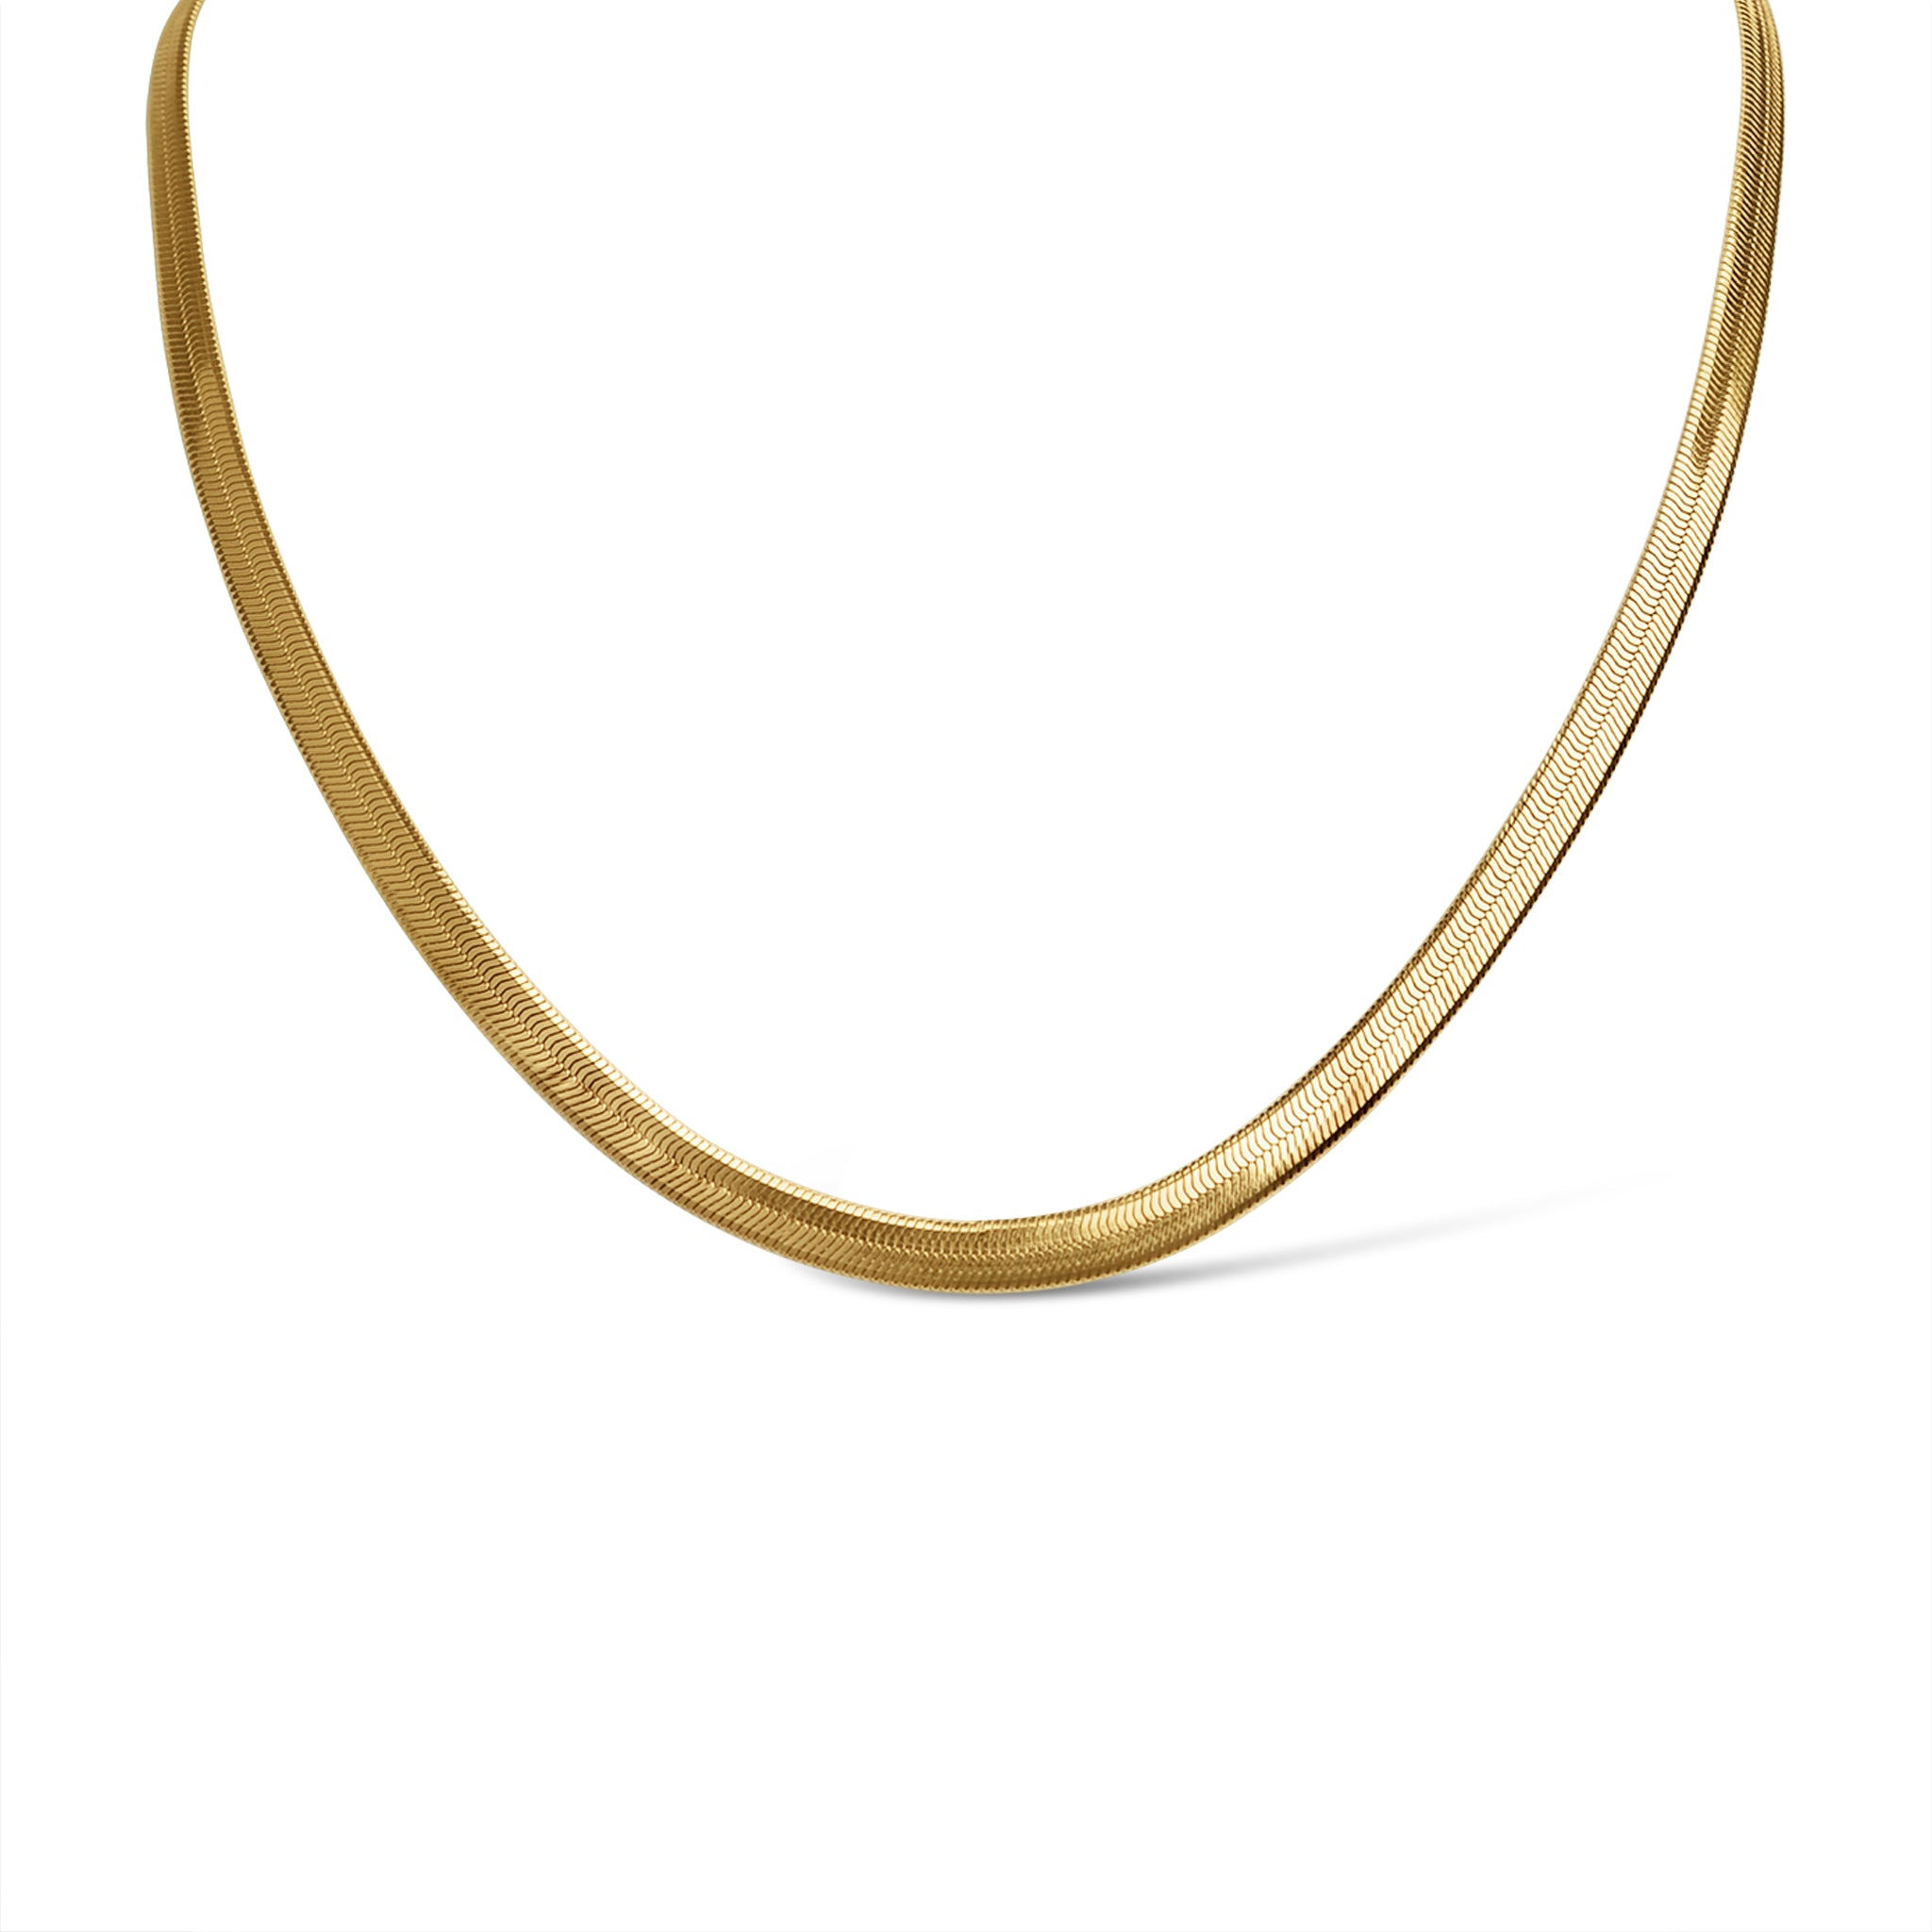 18k Gold PVD Coated Stainless Steel Herringbone Chain Necklace 